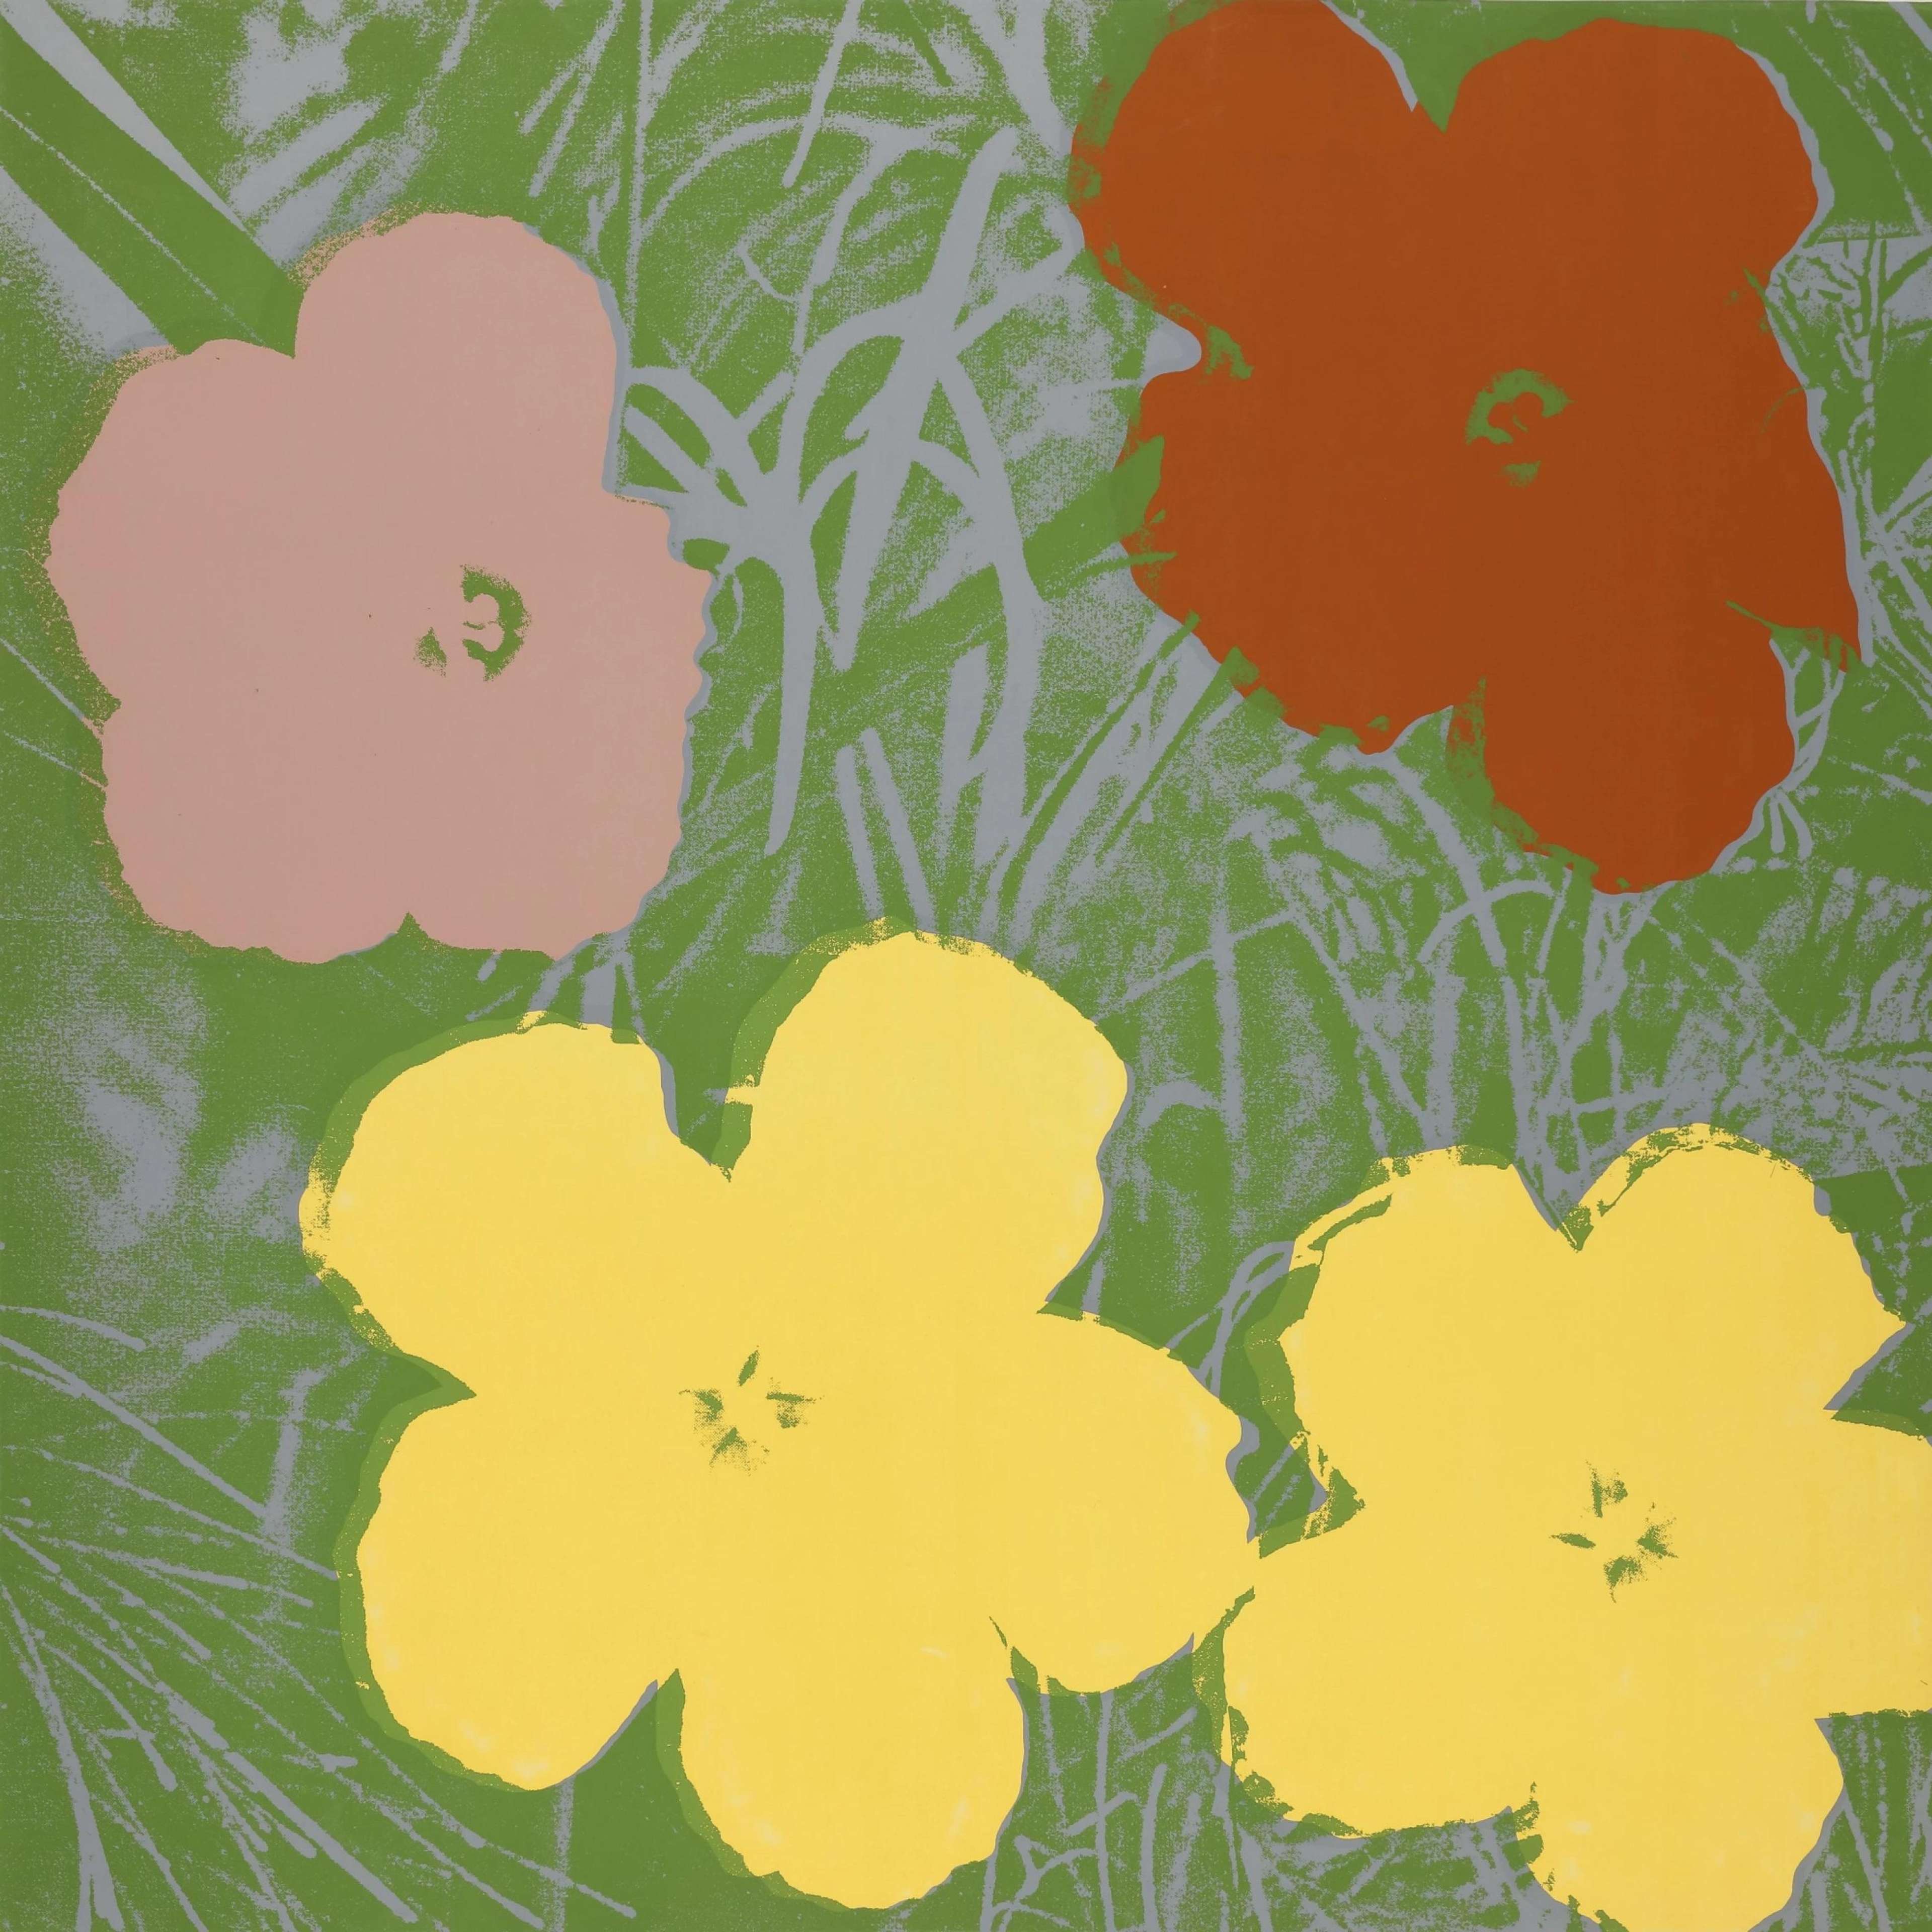 Flowers (F & S 11.65) by Andy Warhol